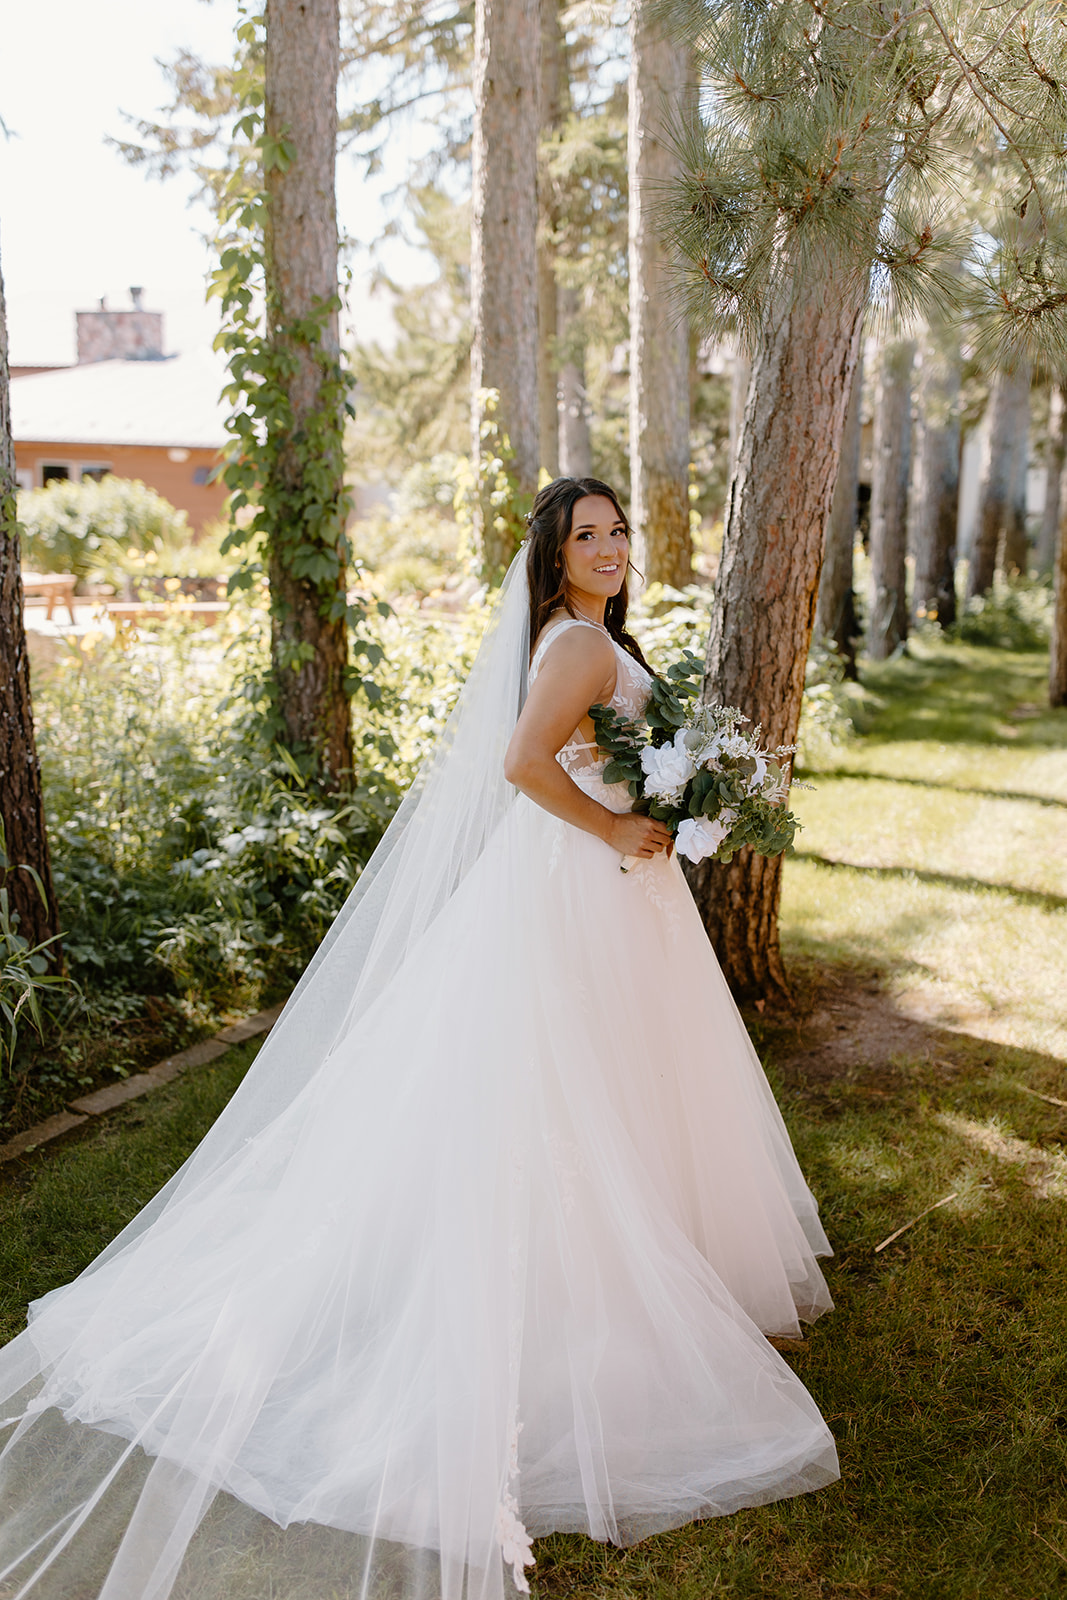 Bride smiles at the camera while holding her bouquet in front of a line of trees